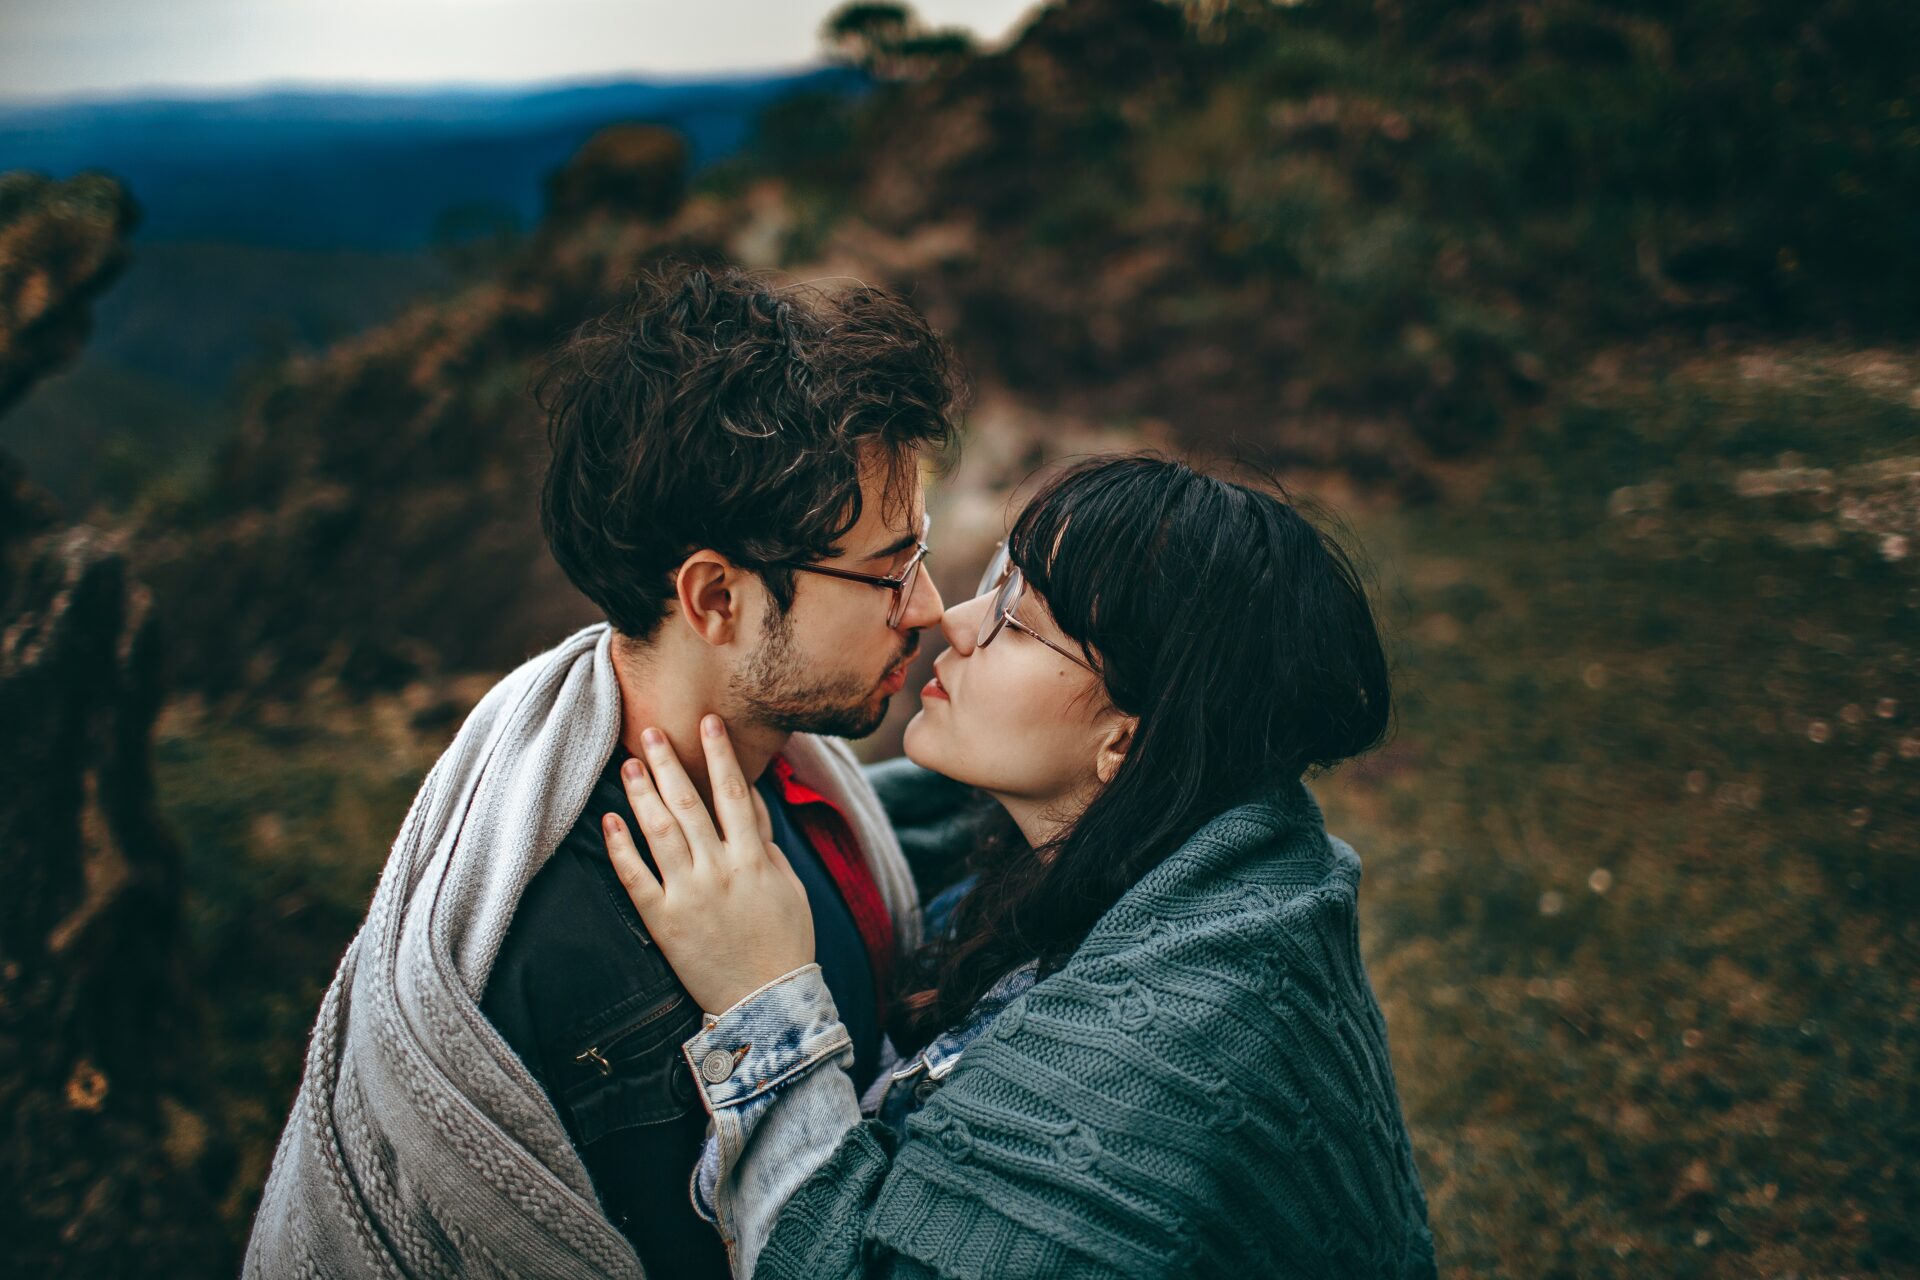 How To Build Intimacy Intentionally